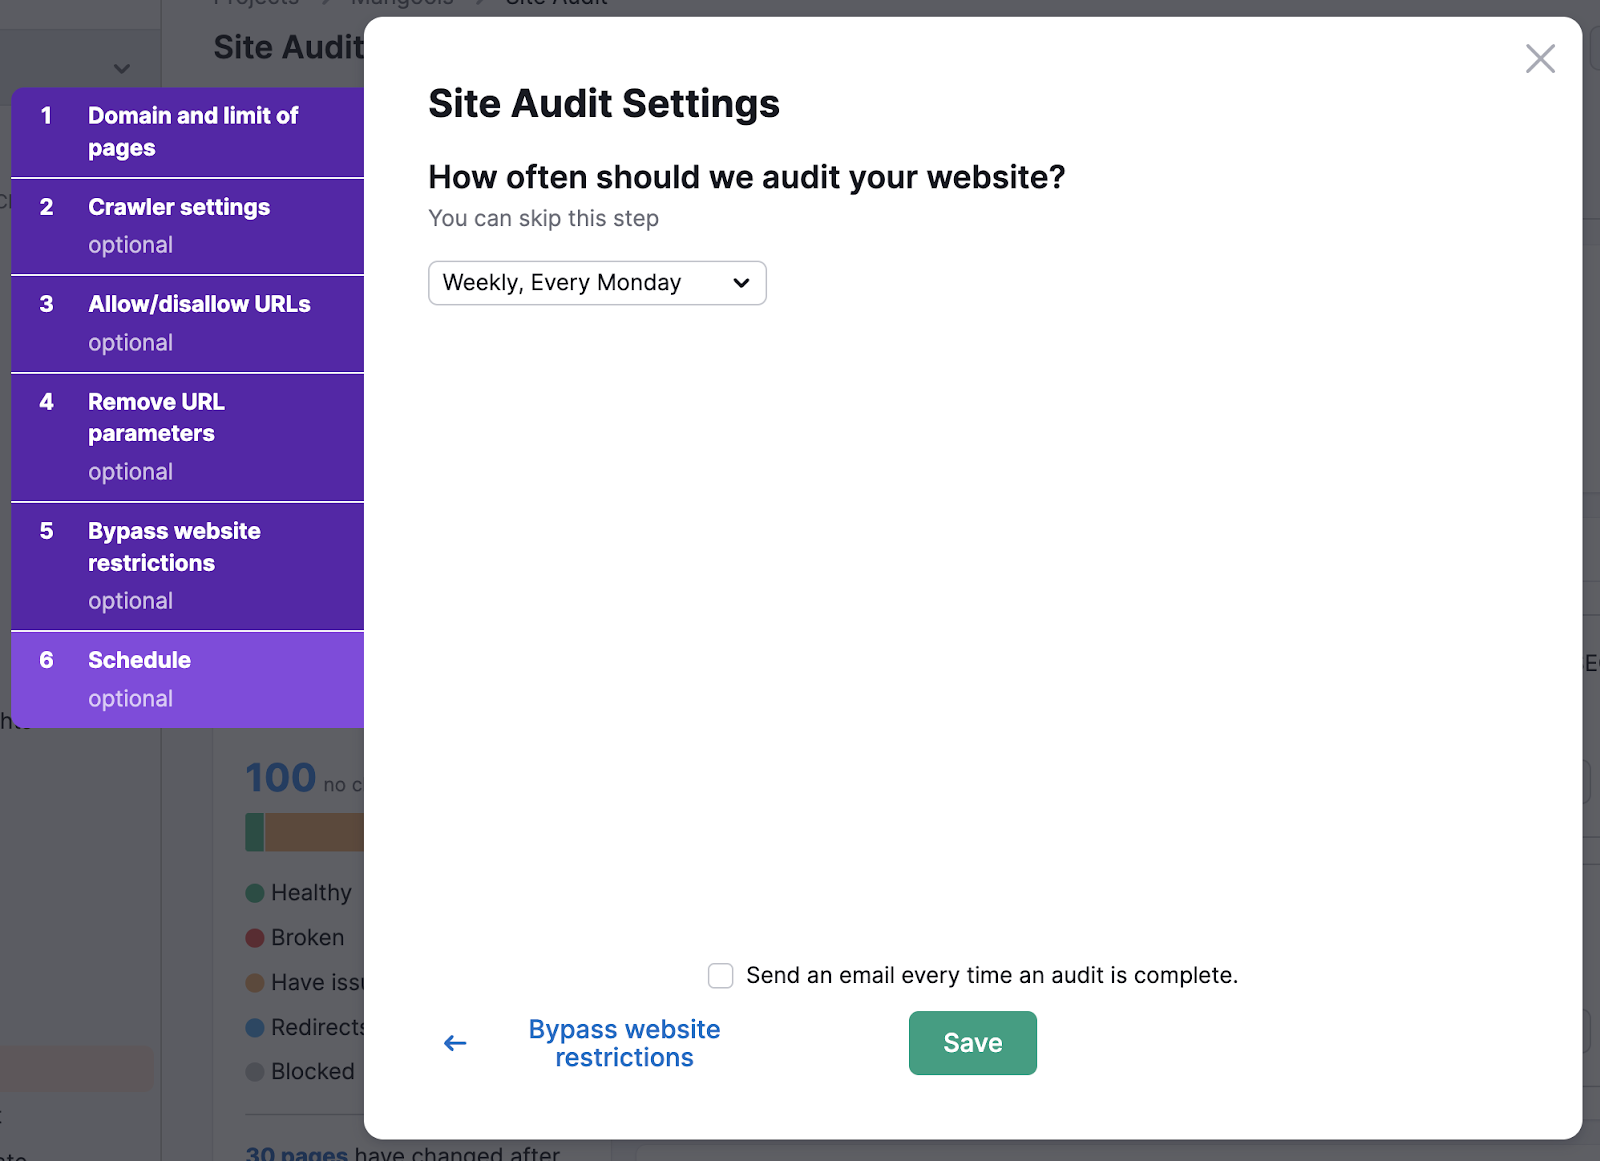 Schedule play   audits nether  "Site Audit Settings" window